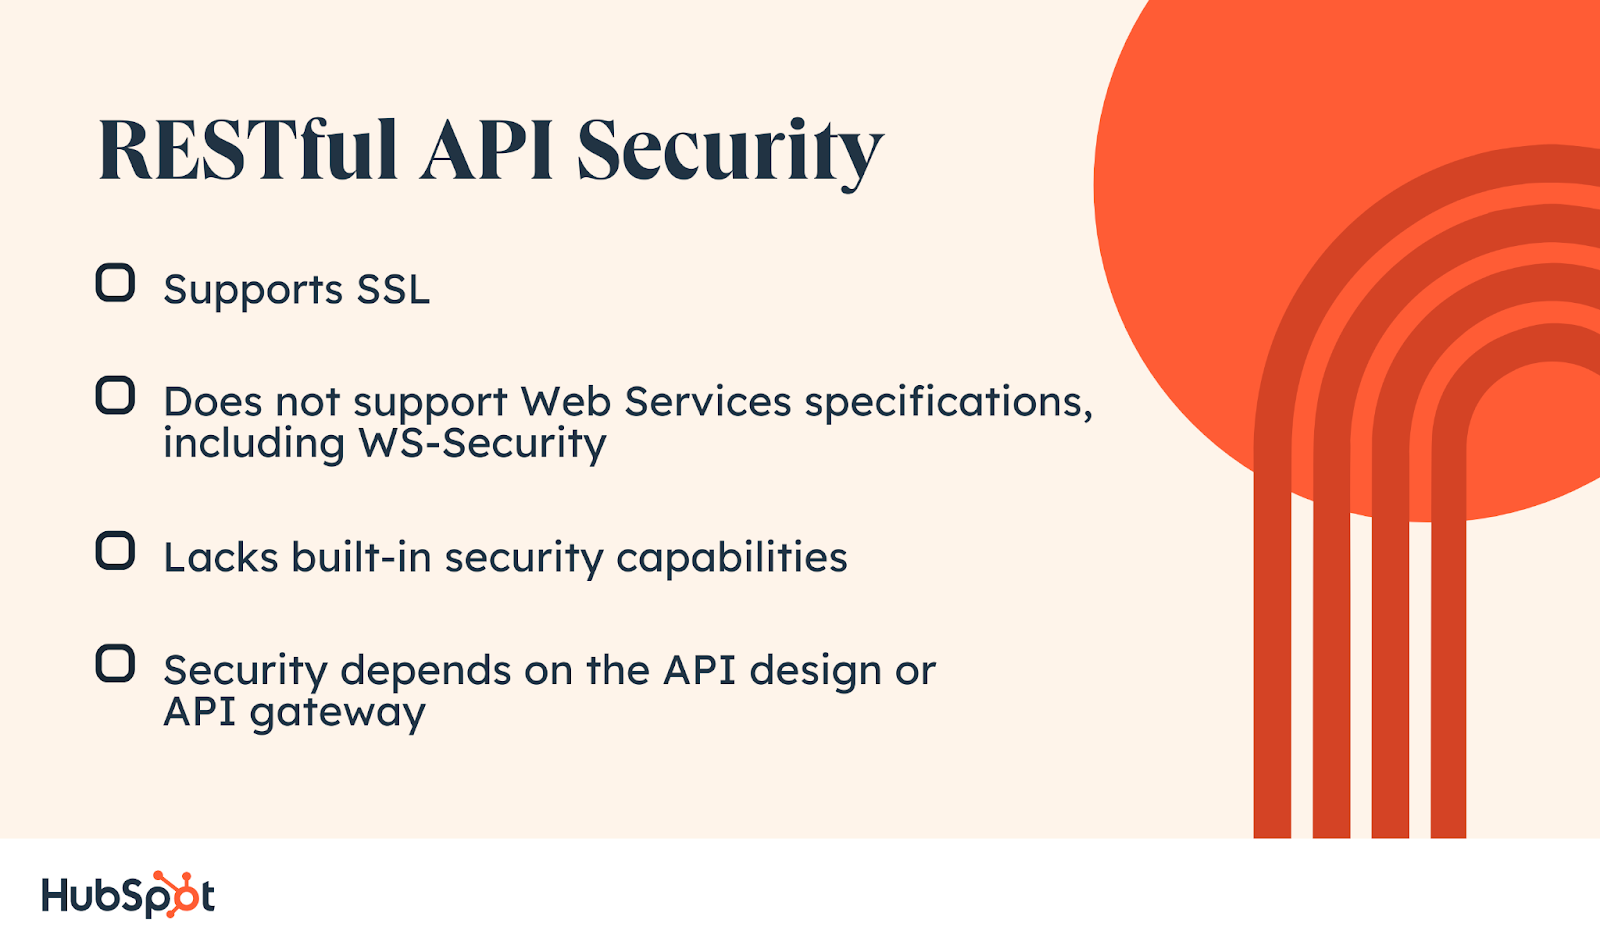 RESTful API Security. Supports SSL. Does not support Web Services specifications, including WS-Security. Lacks built-in security capabilities. Security depends on the API design or API gateway